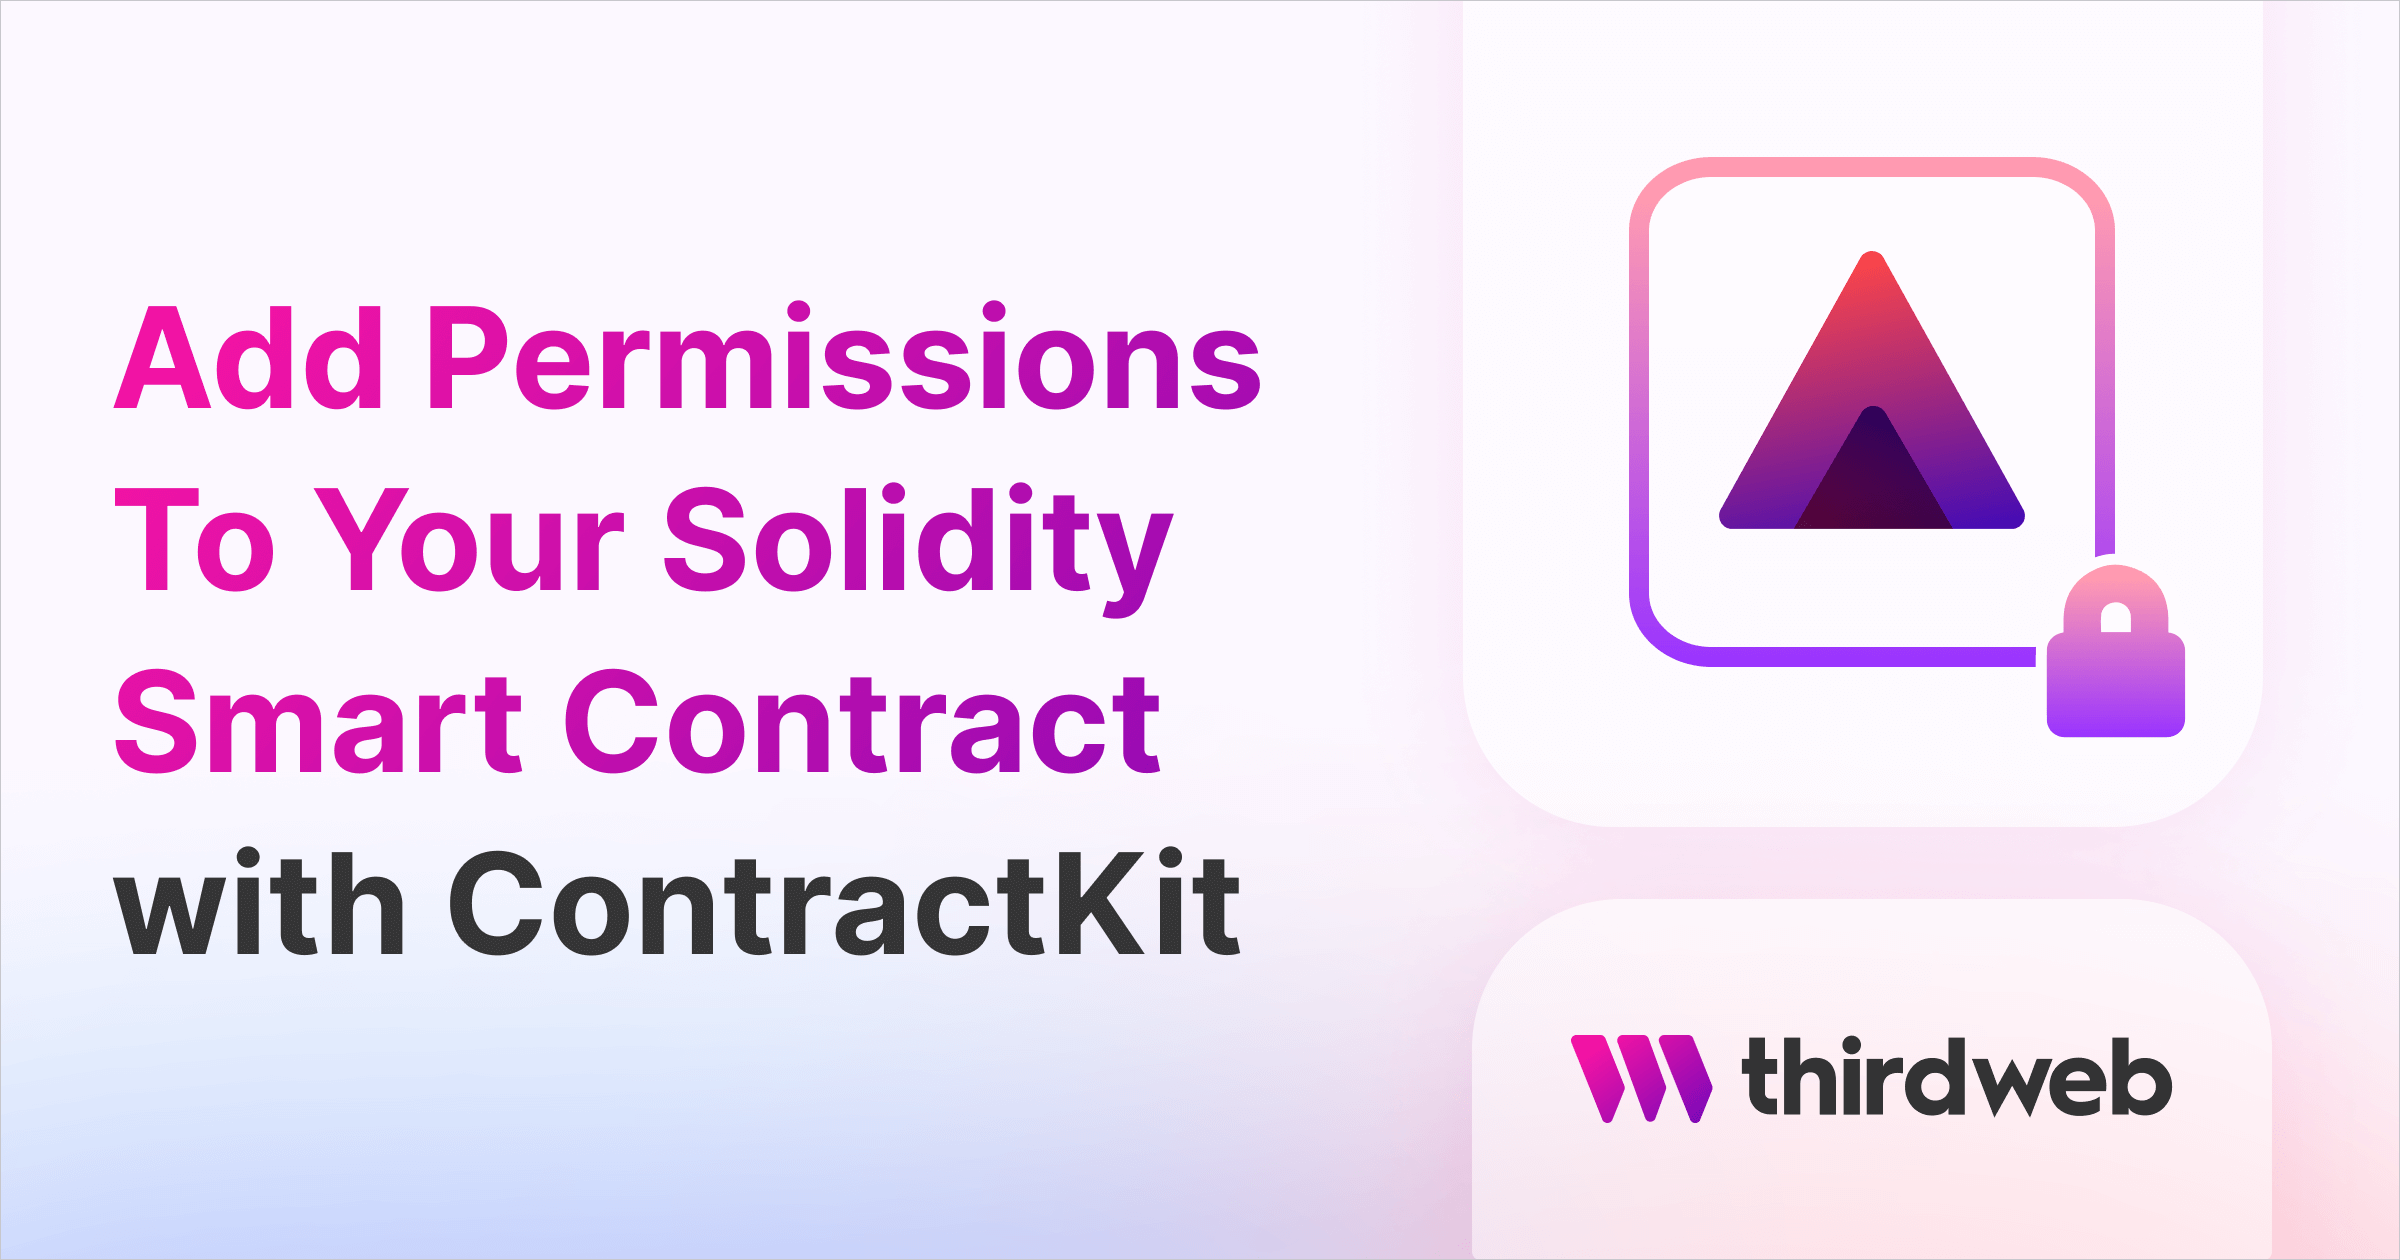 How to Add Permissions to Your Smart Contract in Solidity - thirdweb Guides